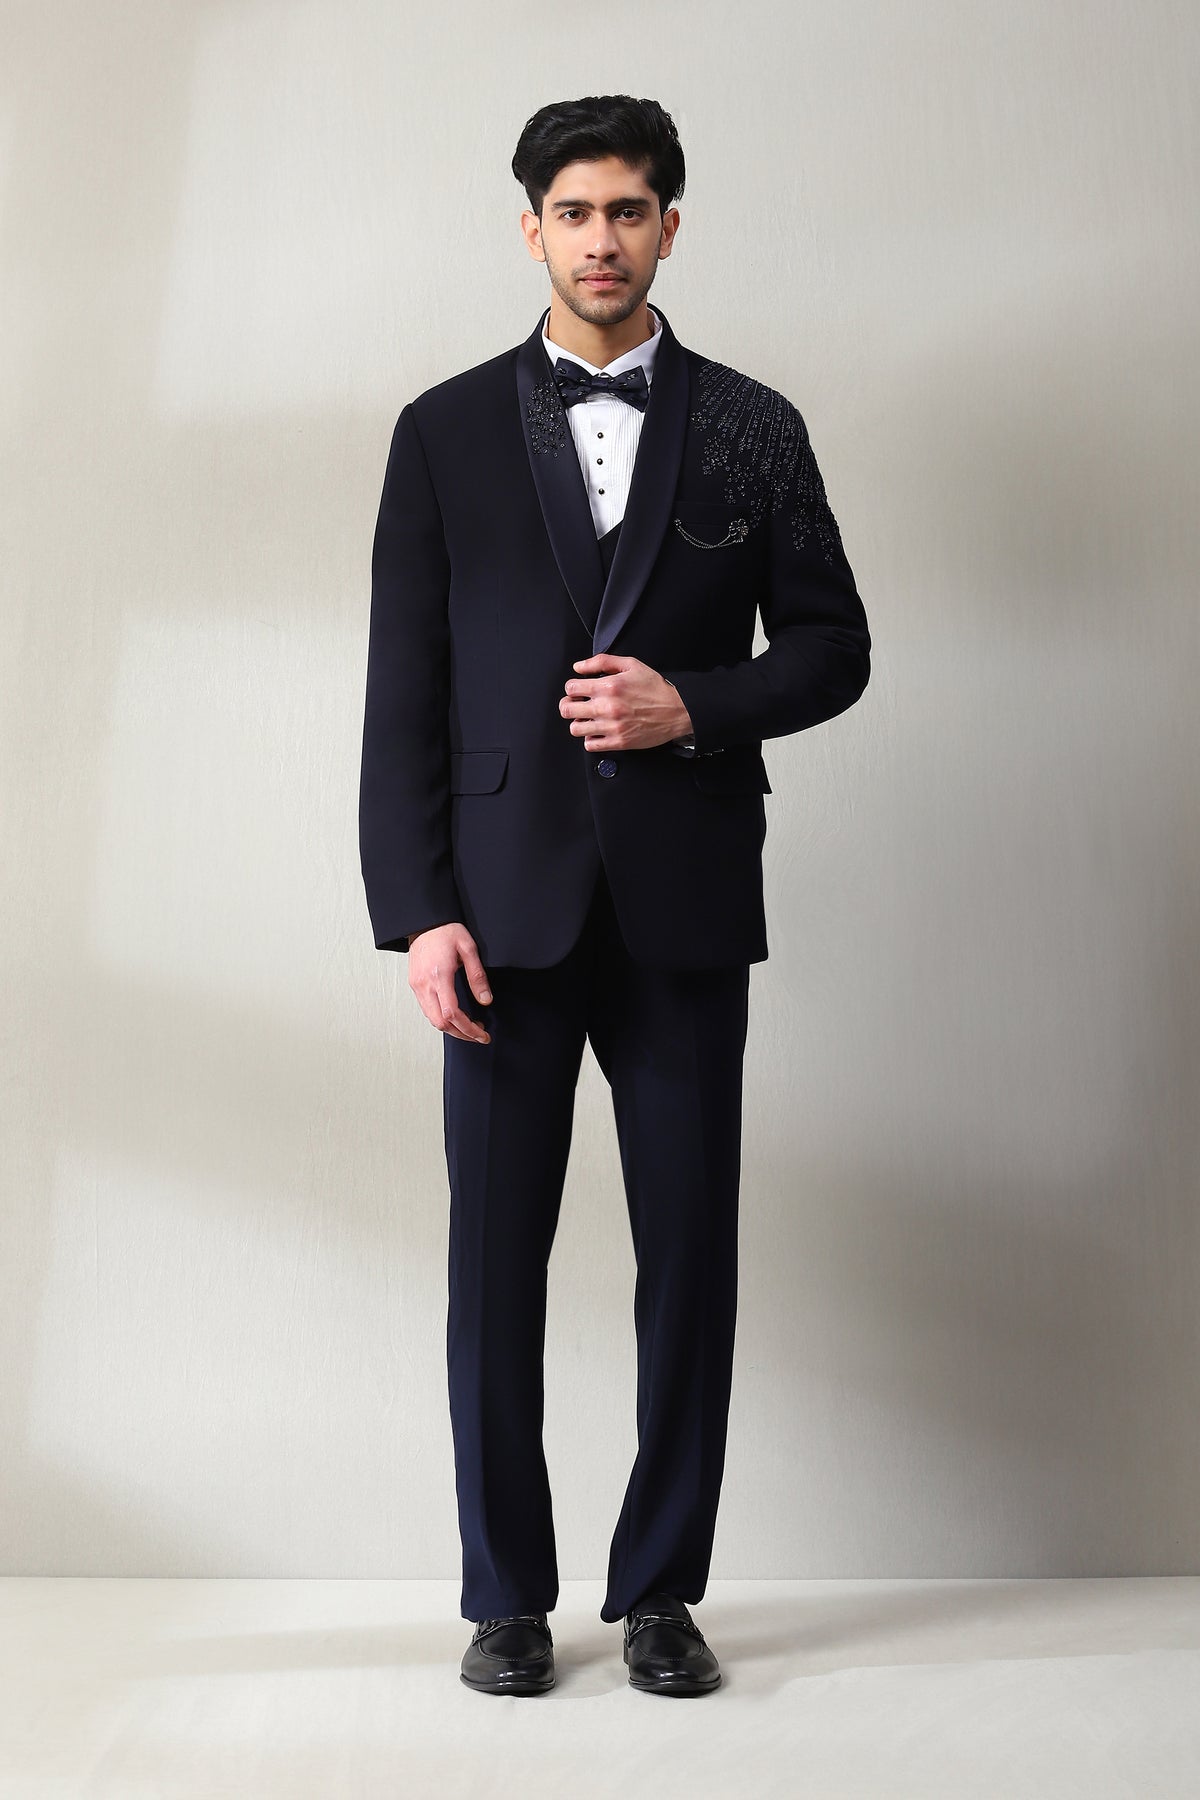 This classy Italian fabric black tuxedo is adorned with hand work